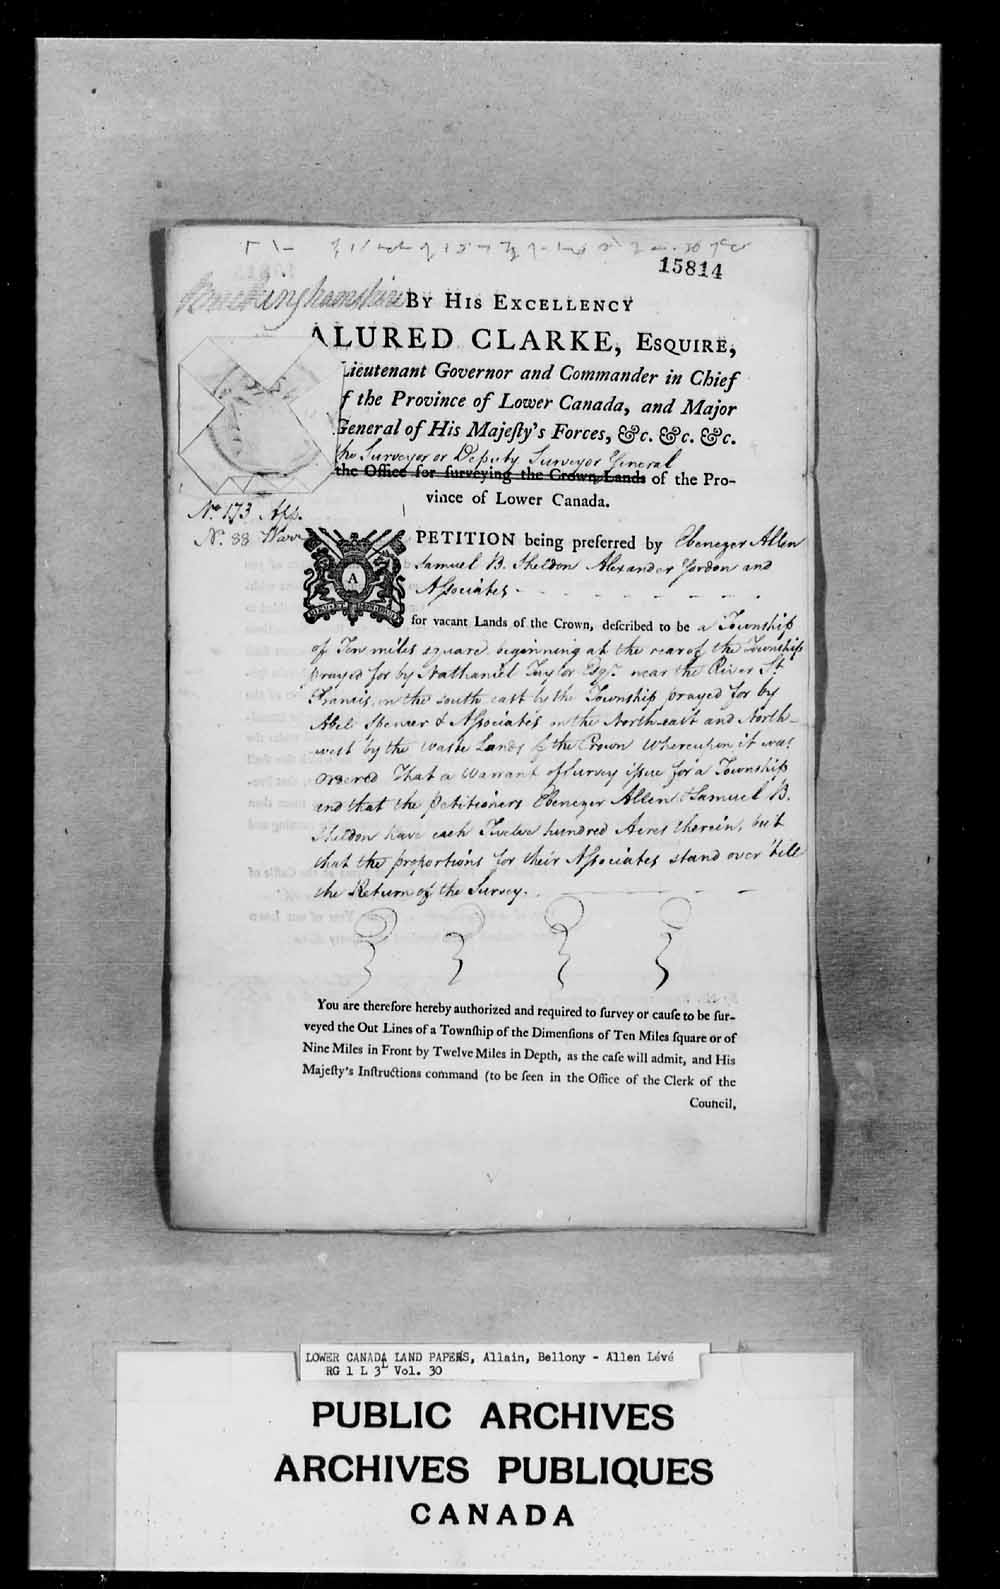 Digitized page of  for Image No.: e003702644